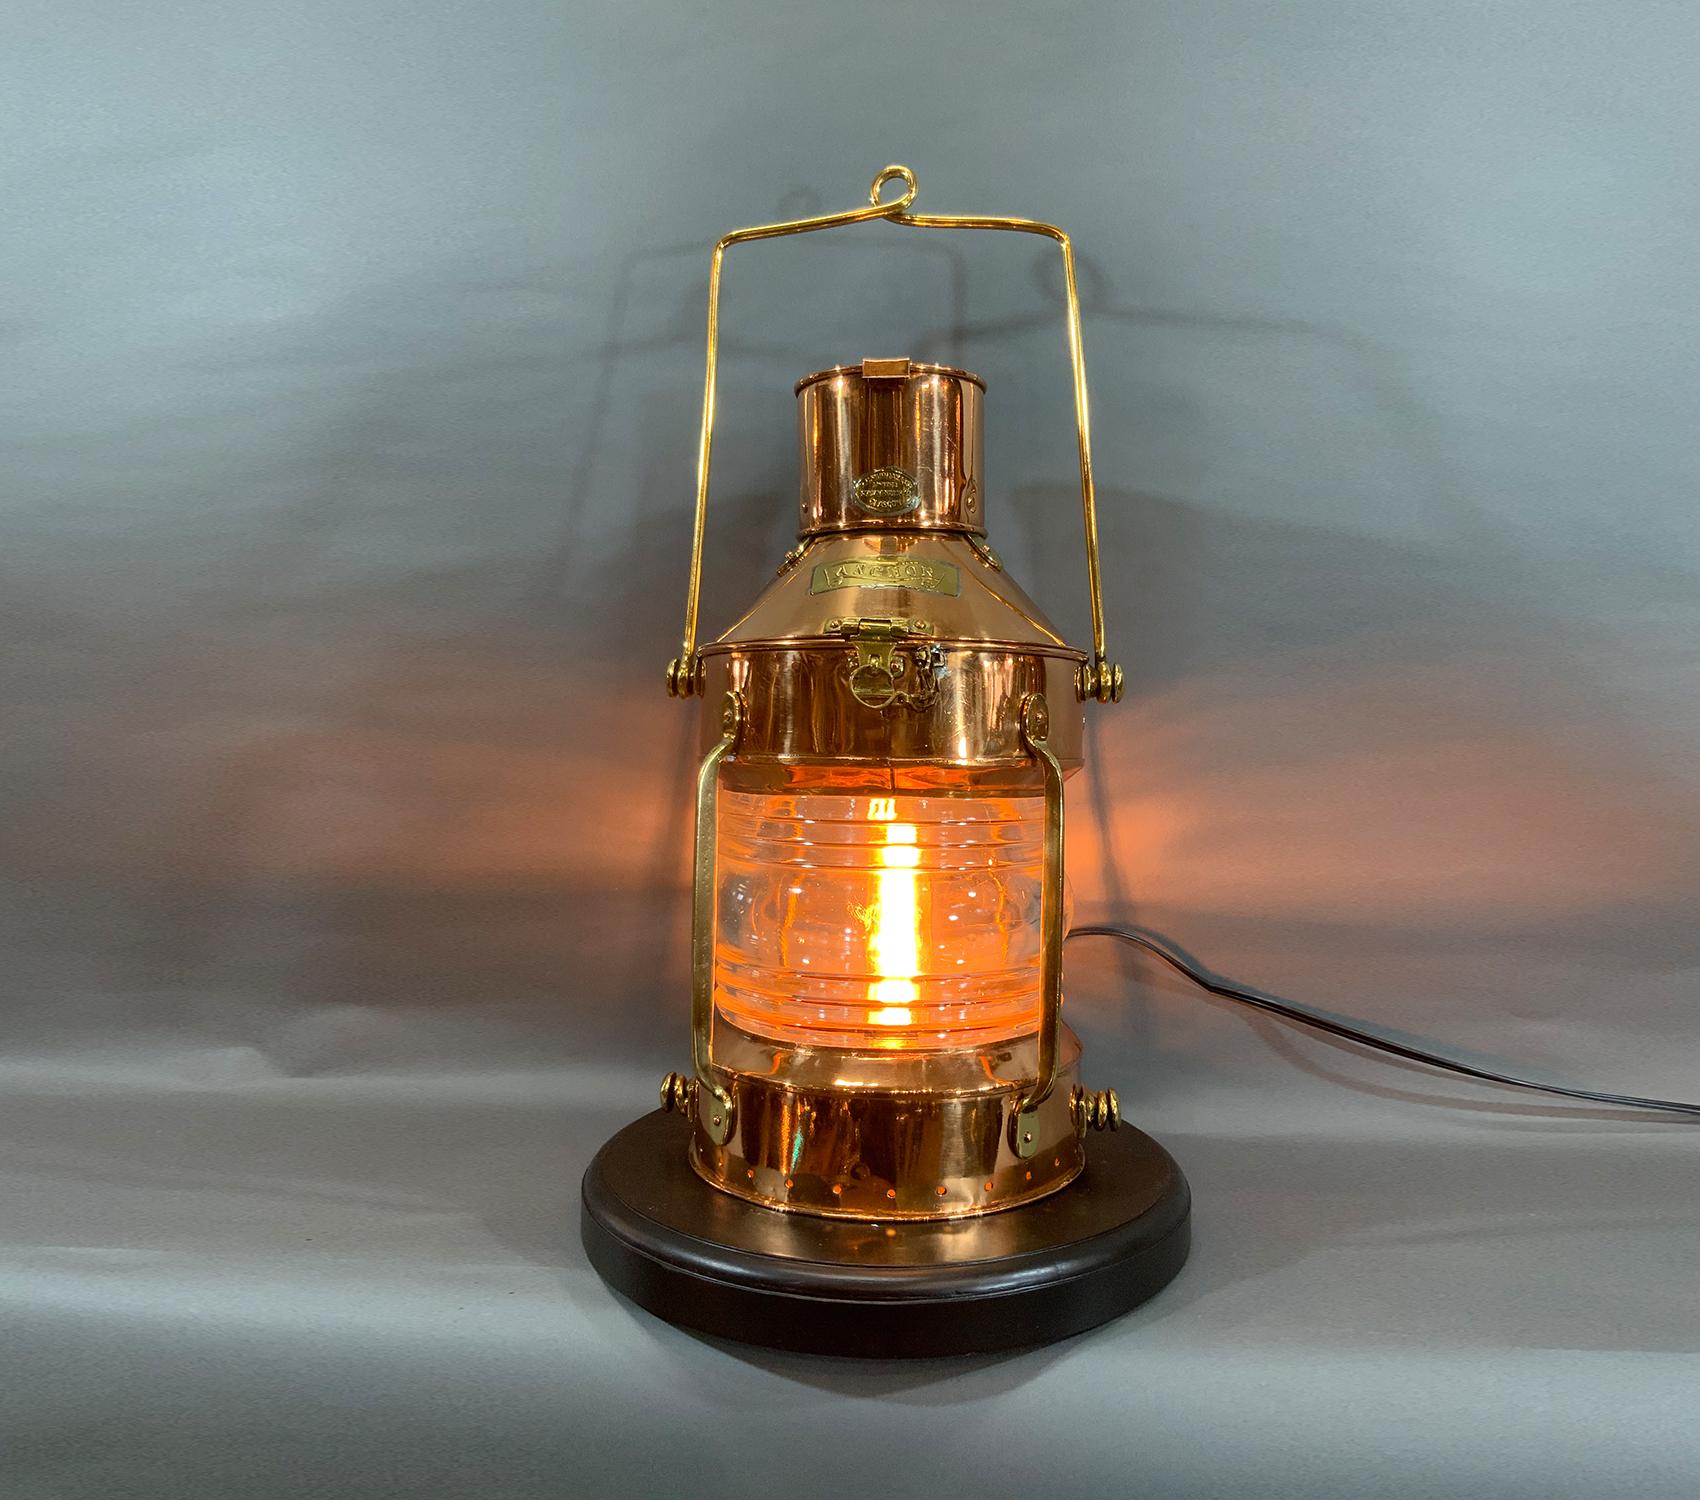 Copper and brass ship’s anchor lantern with maker’s badge from R.C. Murray Limited, 37 Cavendish St., Glasgow. Meticulously polished and lacquered. Brasses include handles, legend plates, protective bars, hinges and hasp. Mounted to a wood base.